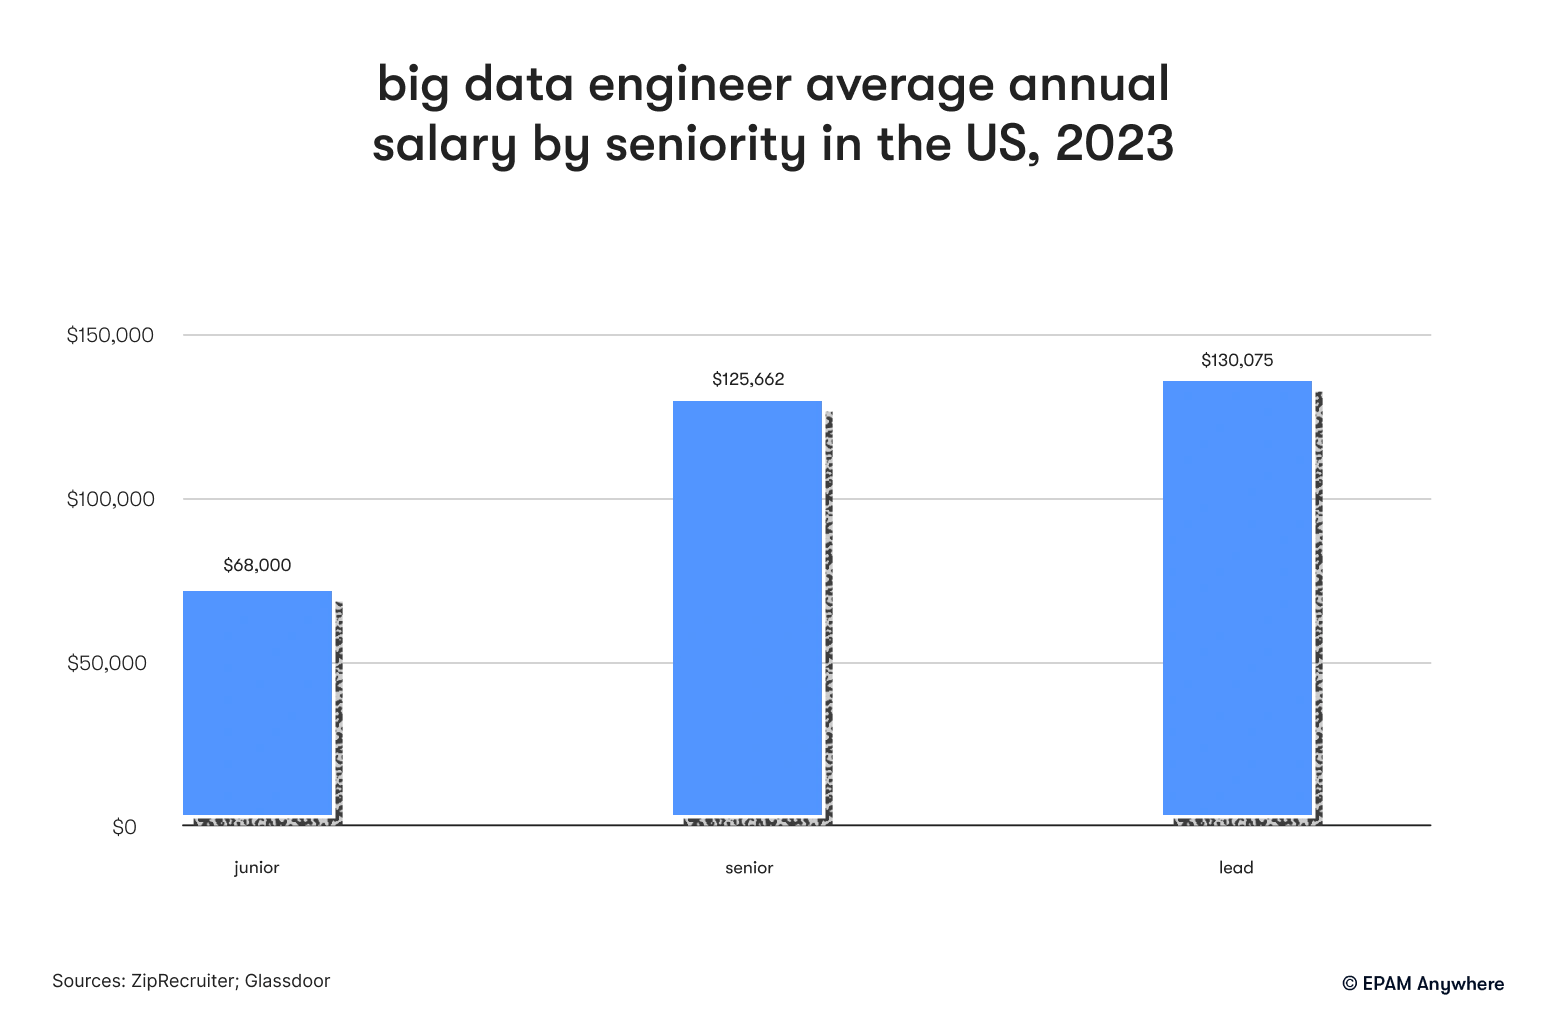 big data engineer average annual salary by seniority in the US, 2023